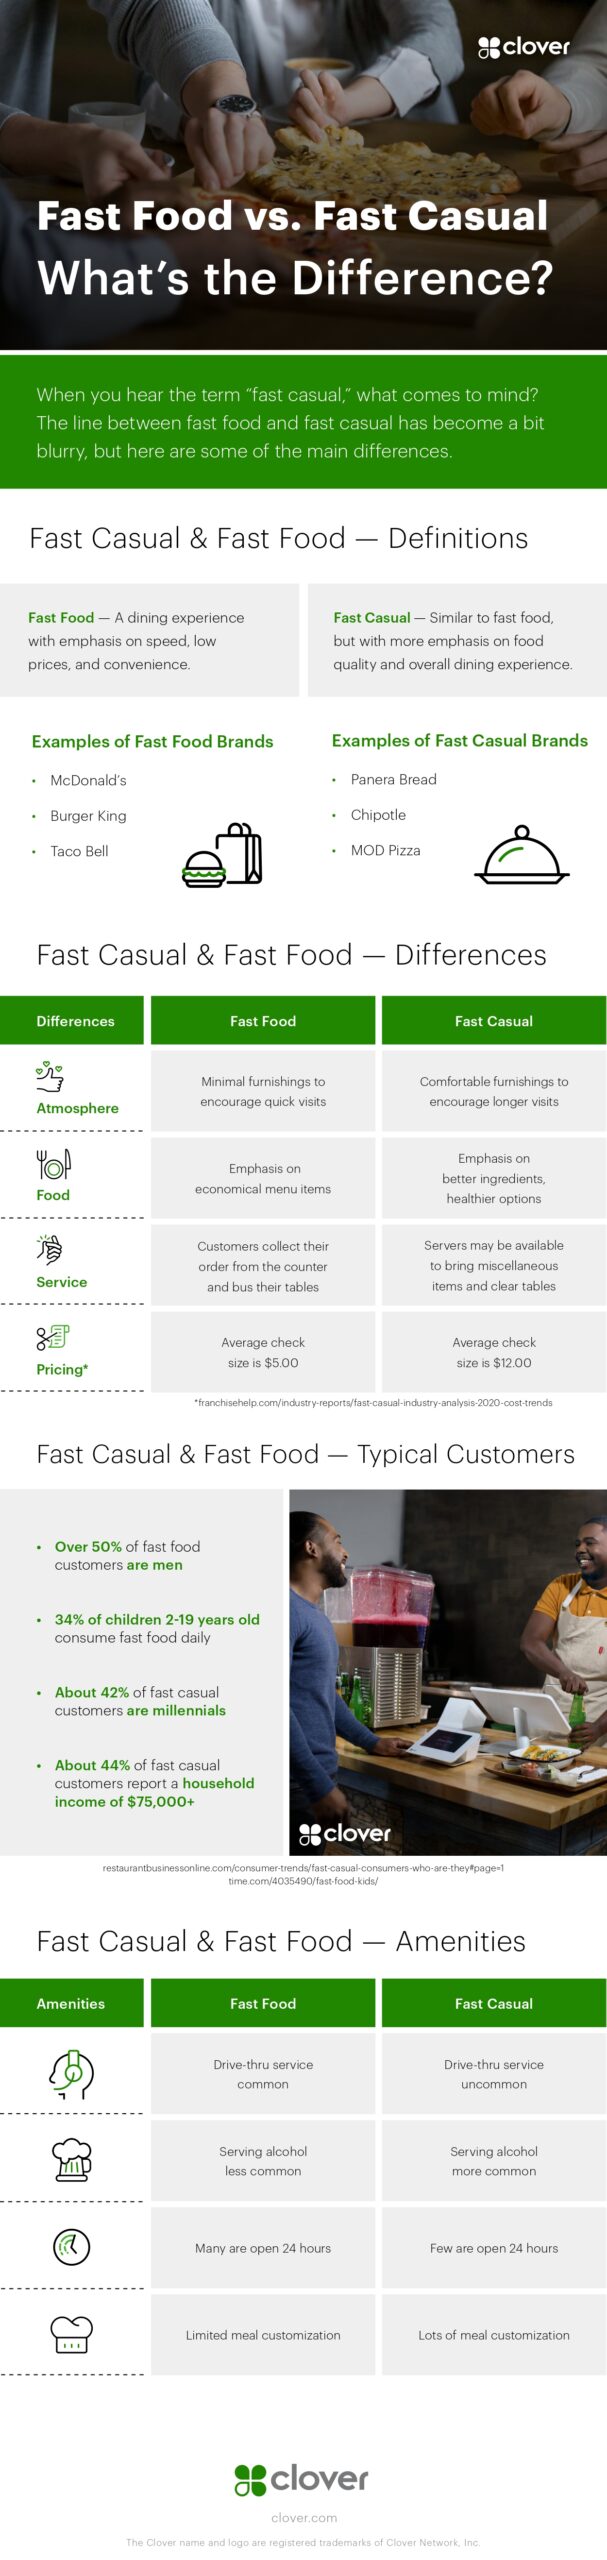 Fast Food Vs Fast Casual: What's the Difference?